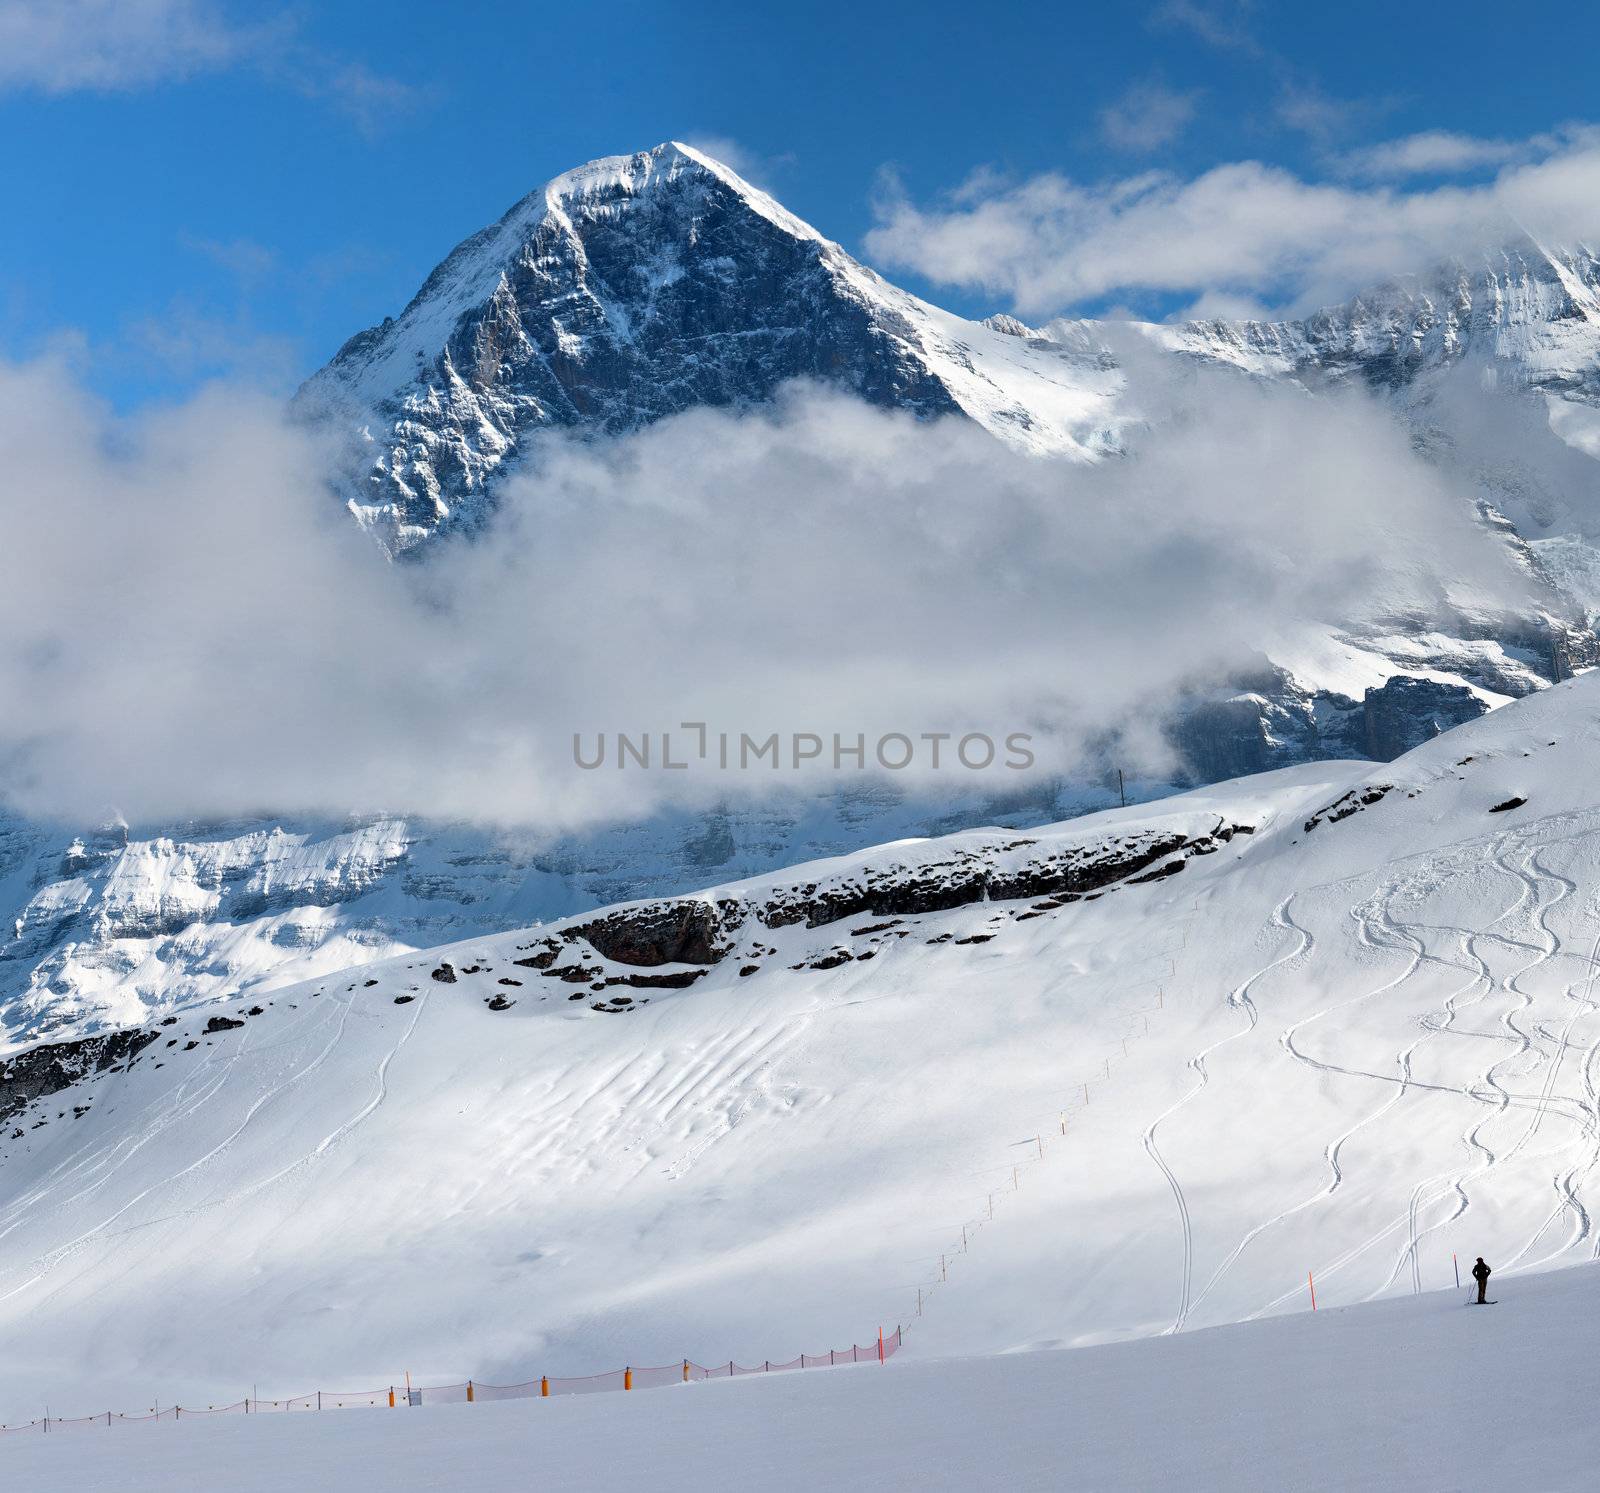 Ski slope in the background of Mount Eiger. The Eiger is a mountain in the Bernese Alps in Switzerland. Ski resort of Grindelwald.